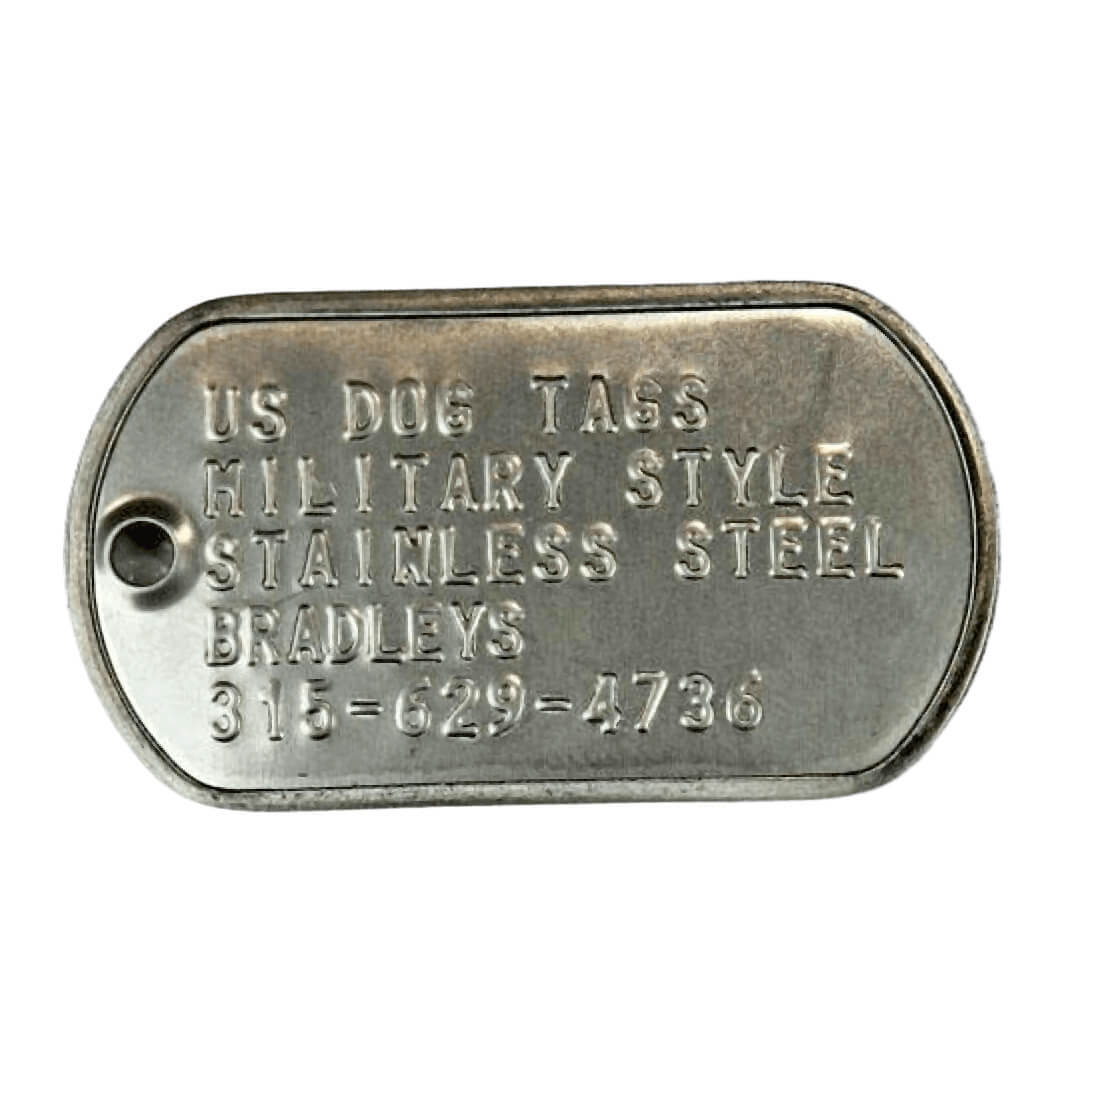 U.S. Military Dog Tags by Branch, Tactical Experts